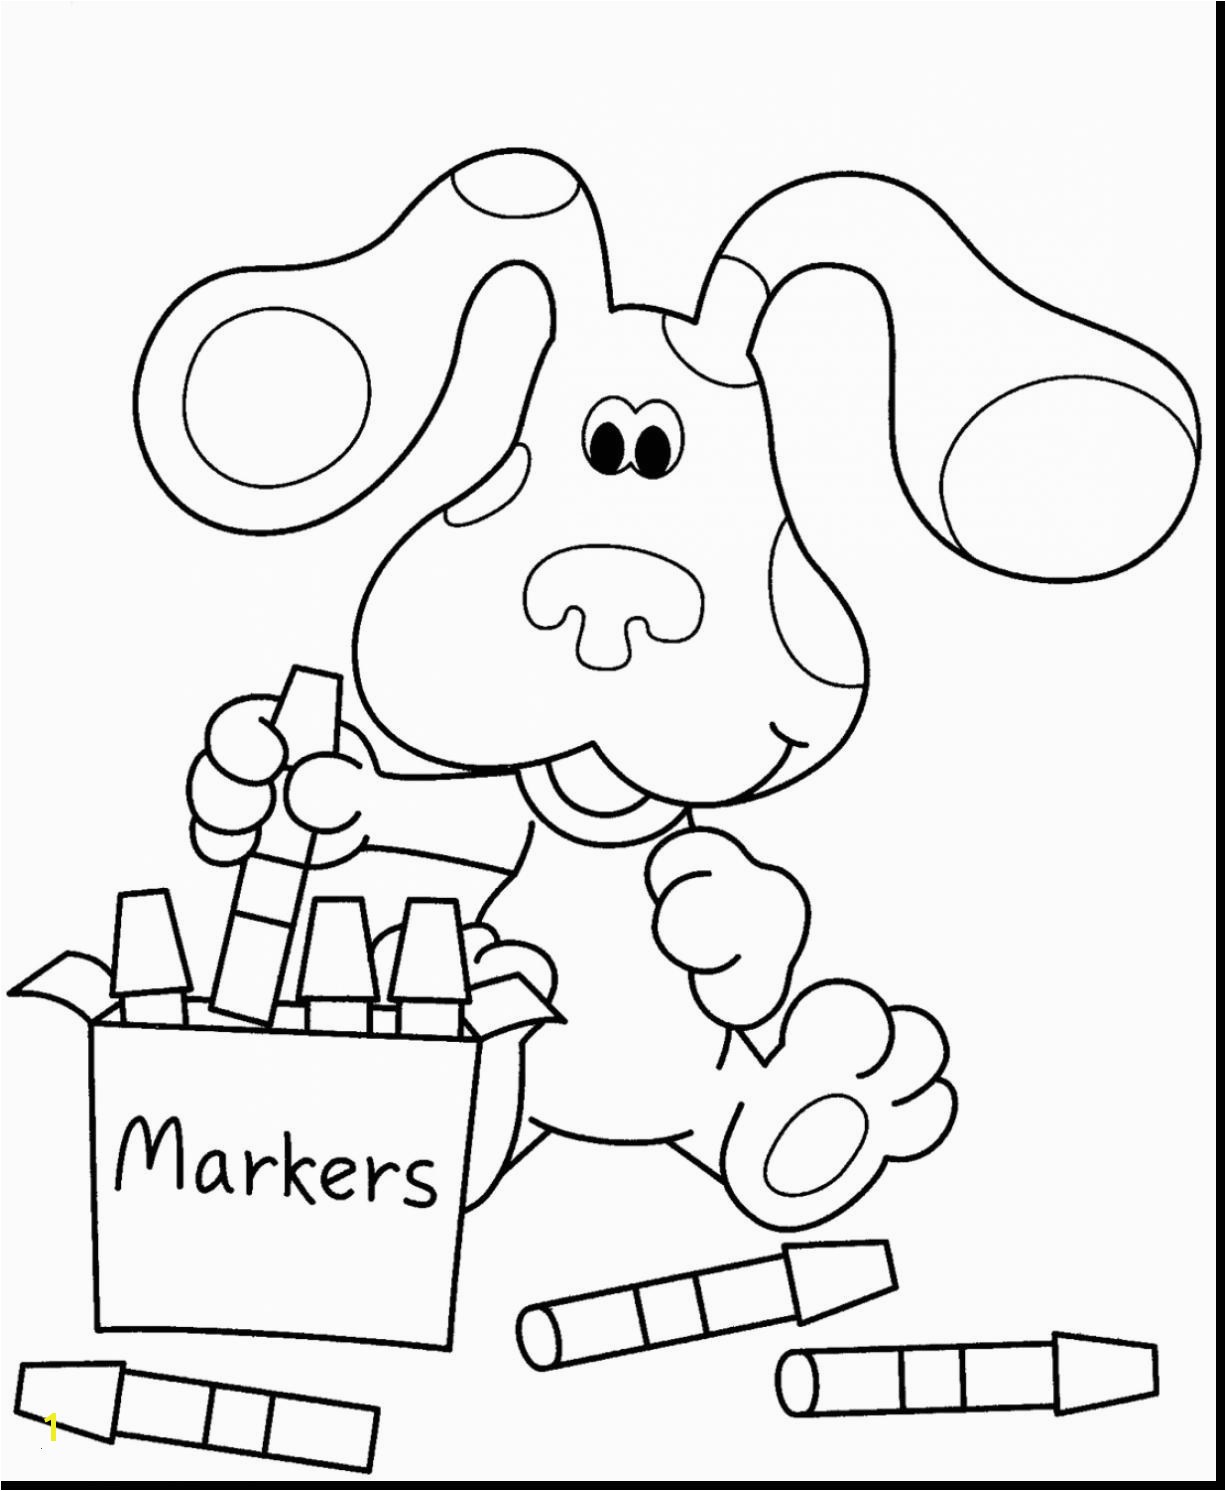 Unique Nick Jr Coloring Book Coloring Pagesnickjr Coloring Pages